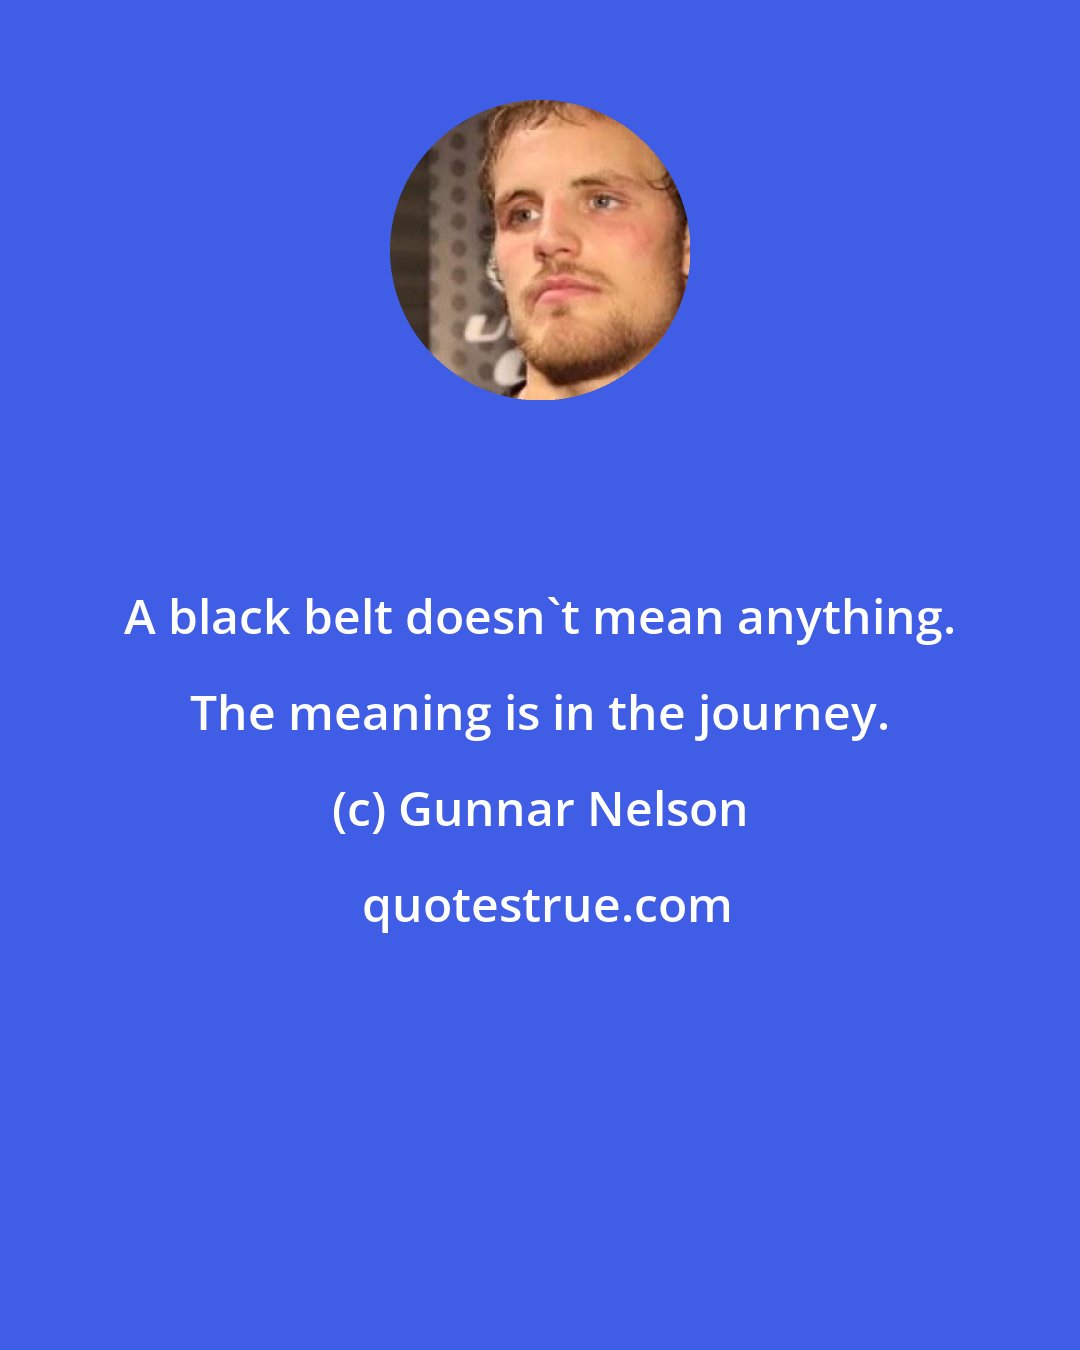 Gunnar Nelson: A black belt doesn't mean anything. The meaning is in the journey.